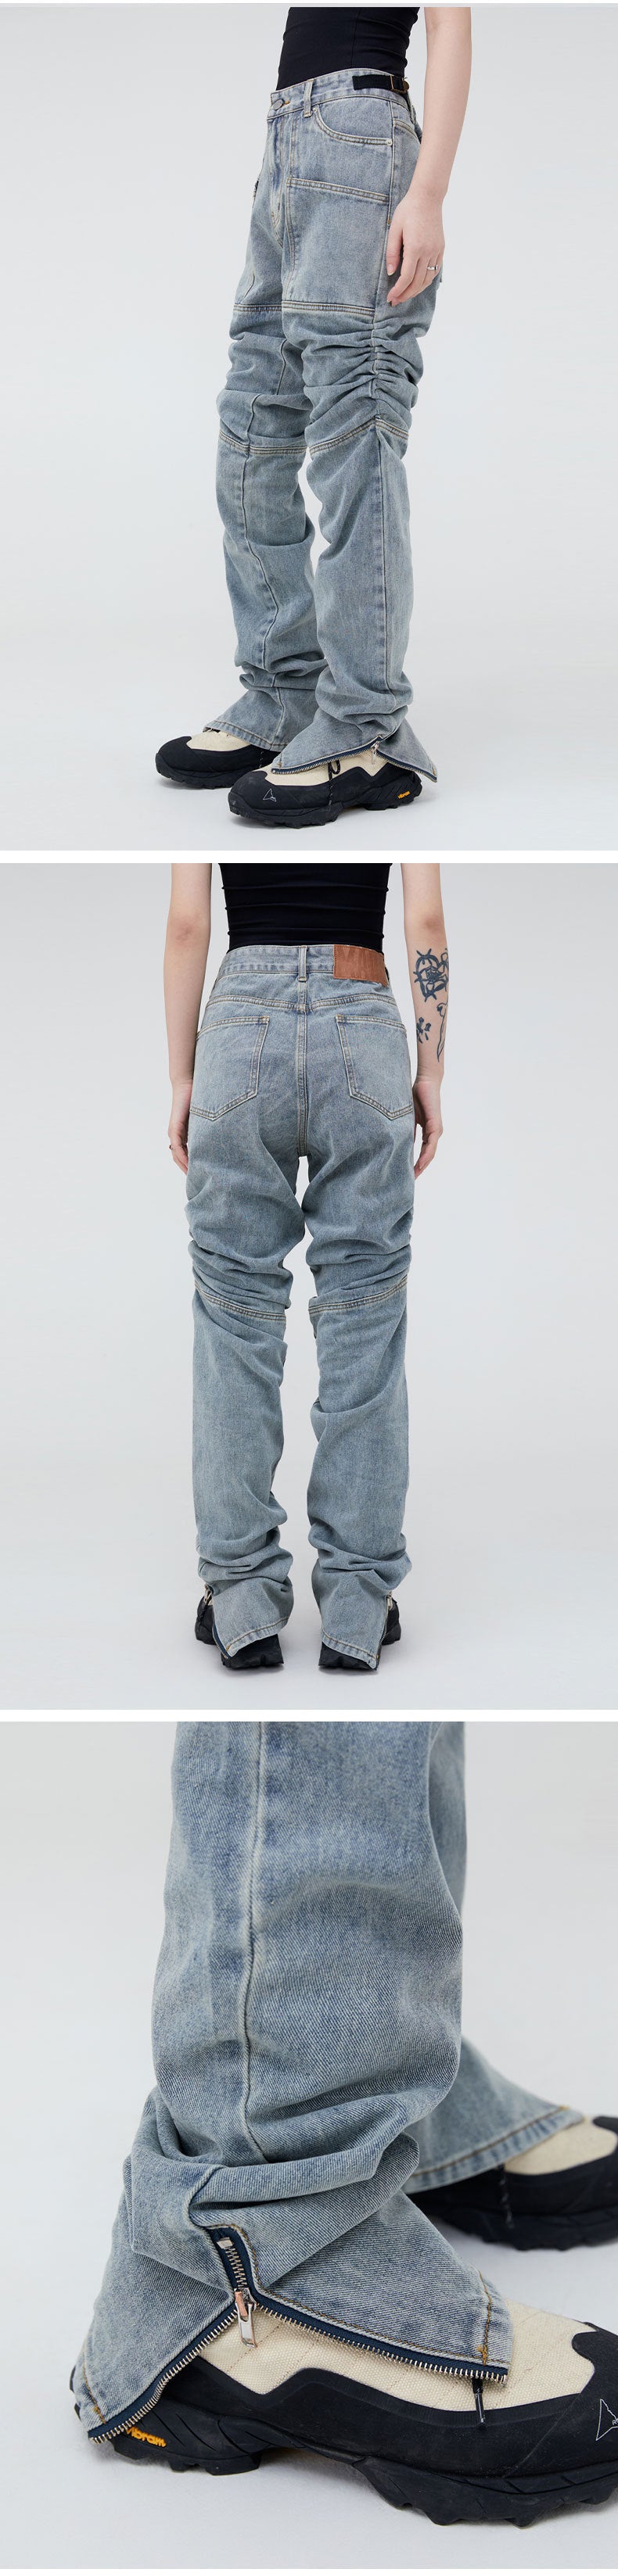 MADE EXTREME Pleated Distressed Jeans